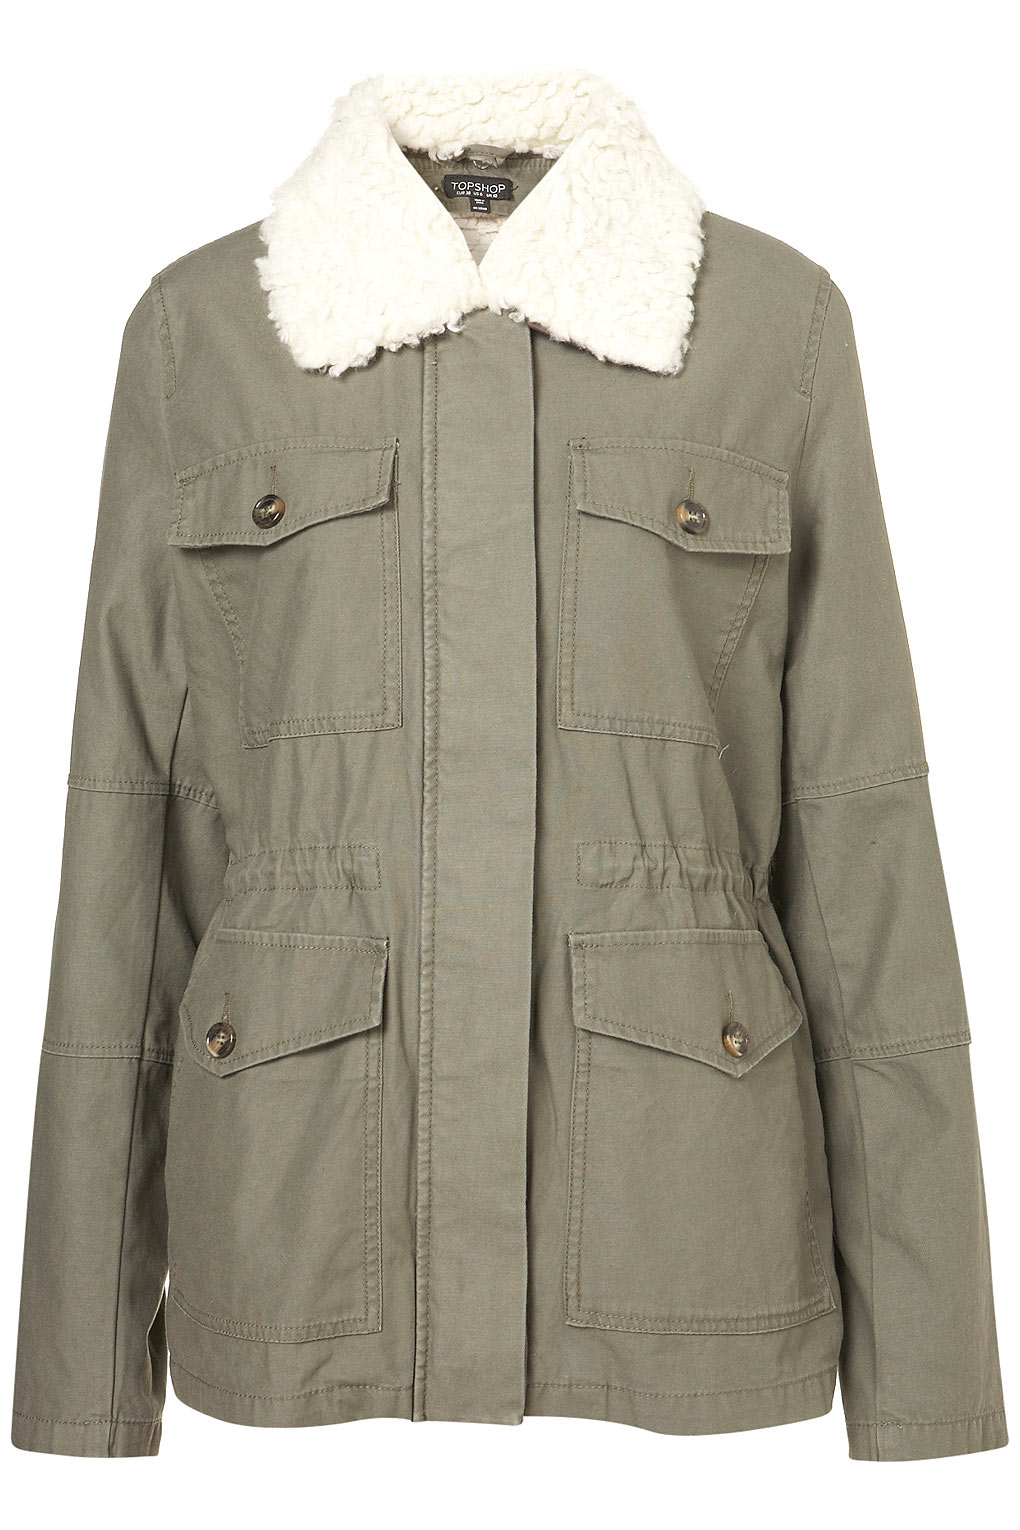 TOPSHOP Borg Lined Army Jacket in Khaki (Natural) - Lyst